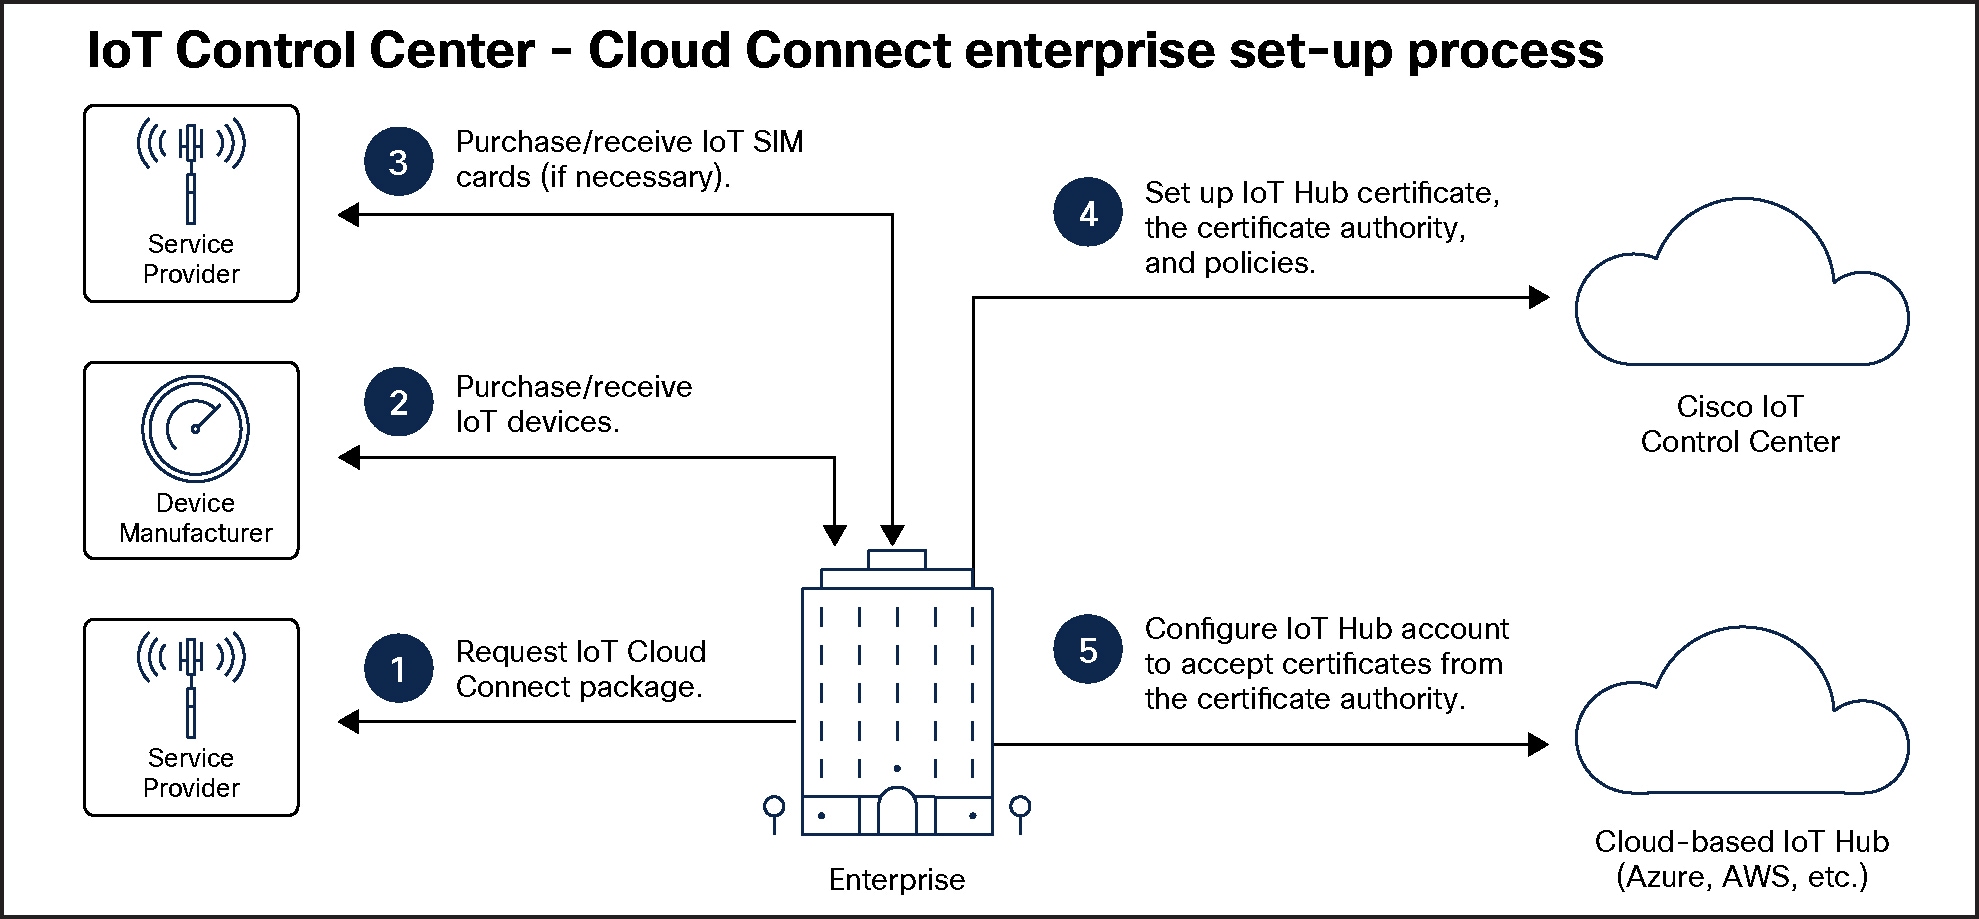 High-level initial setup for IoT Cloud Connect